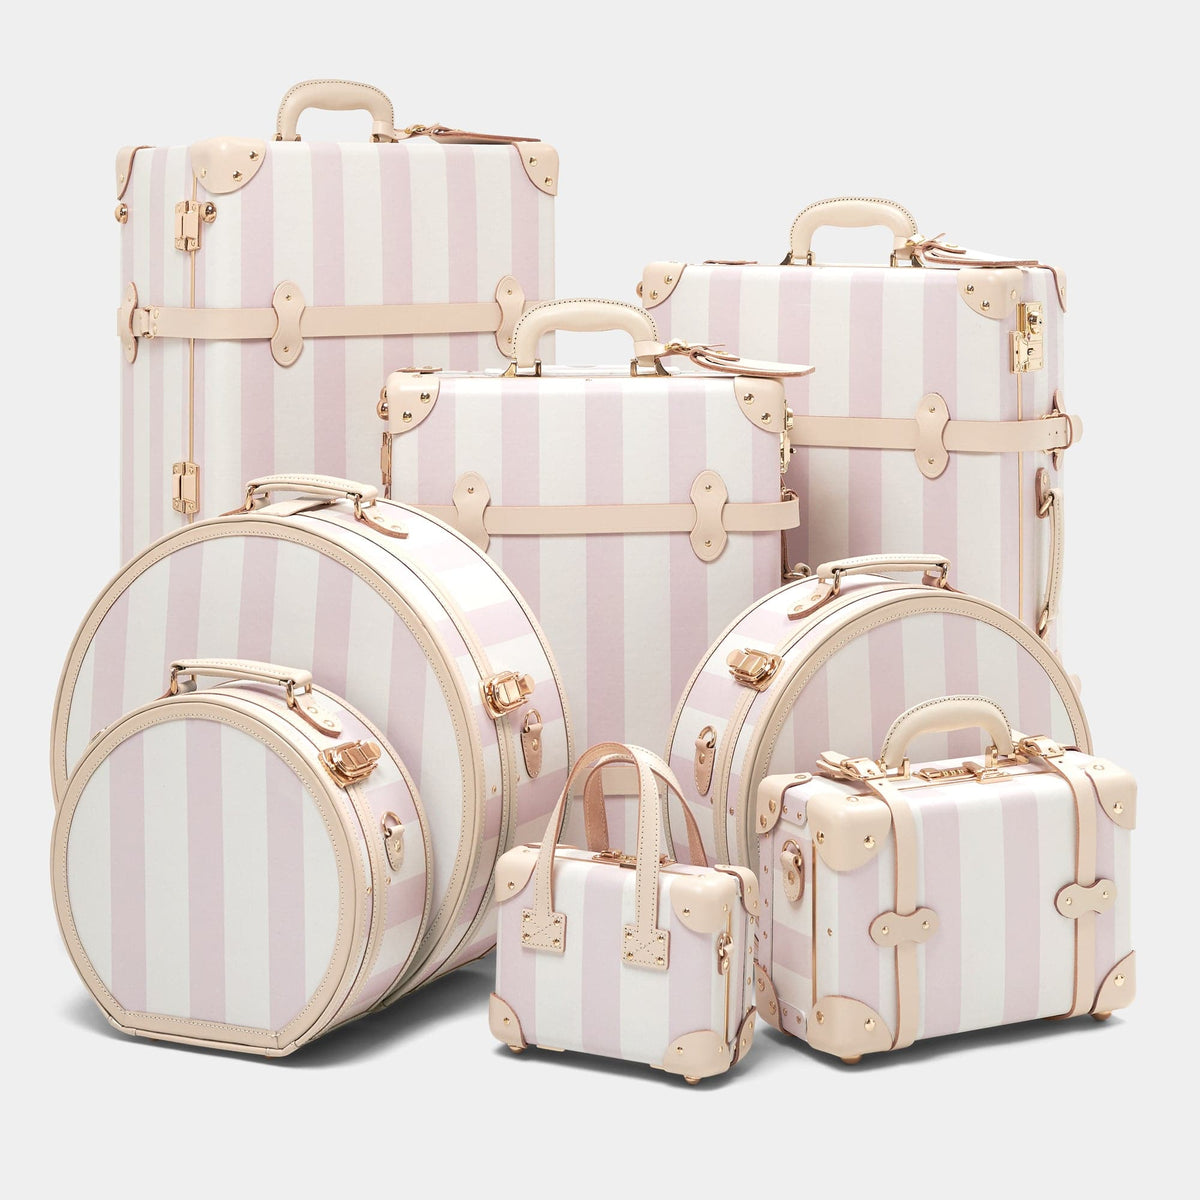 The Illustrator - Pink Hatbox Deluxe Hatbox Deluxe Steamline Luggage 